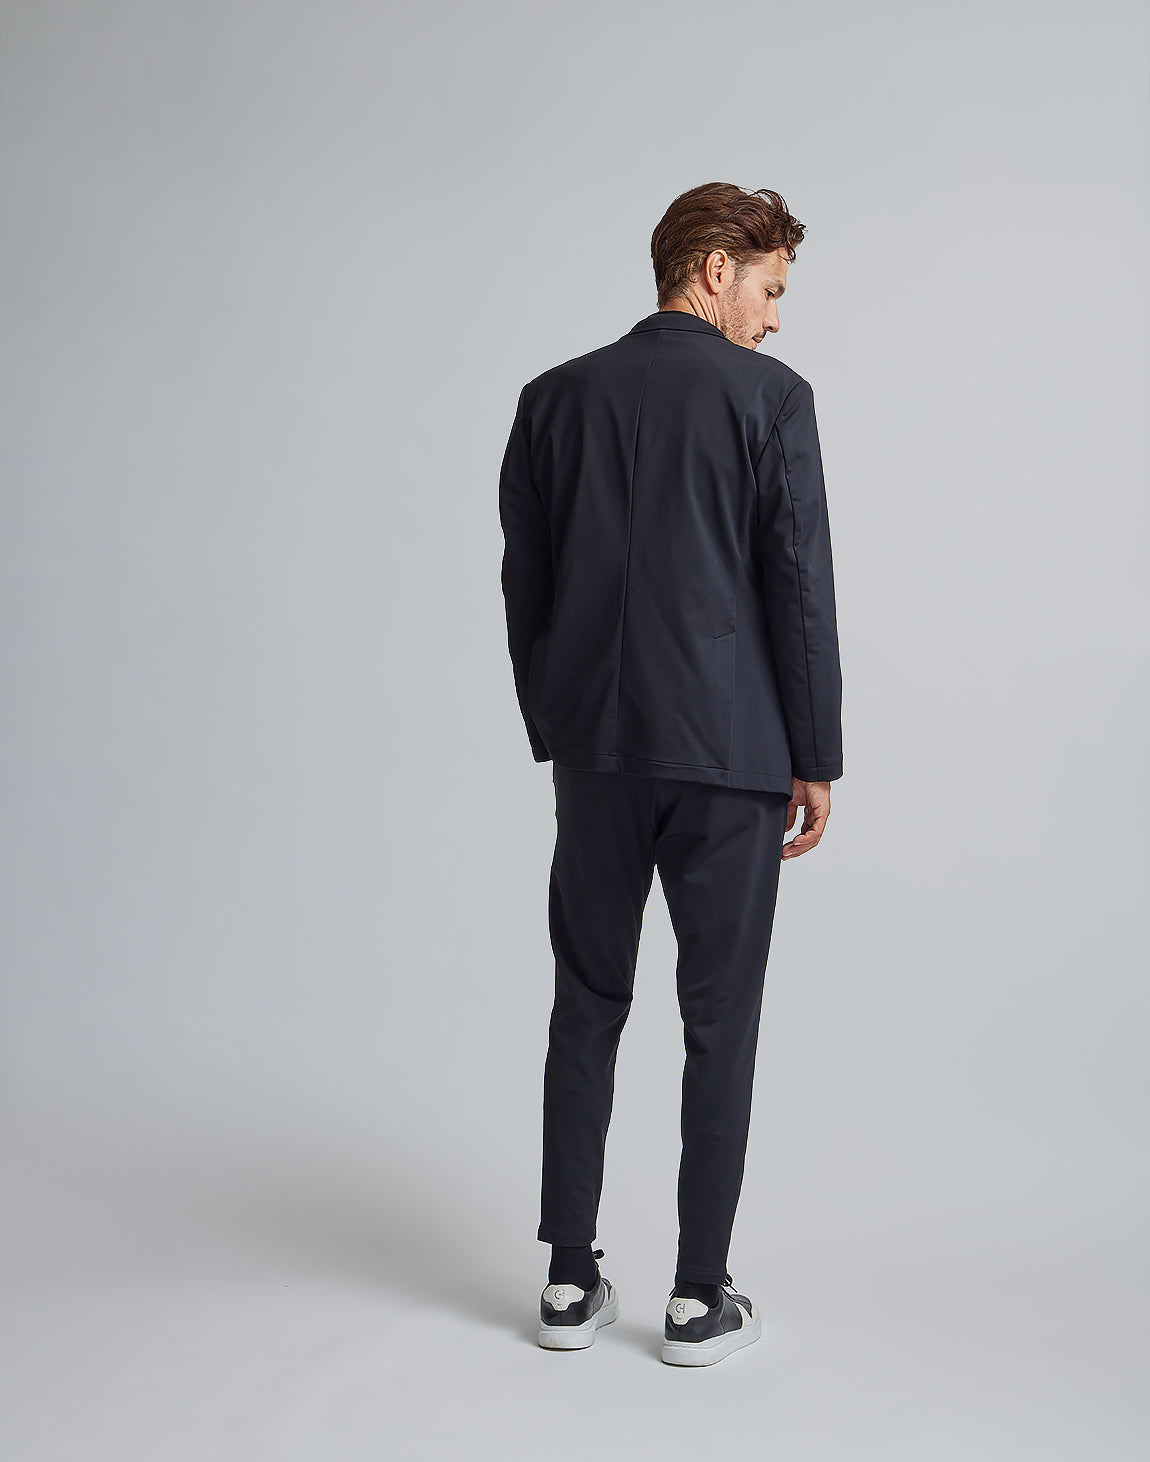 CRONOS BLACK TAILORED STRETCH JACKET – クロノス CRONOS Official Store